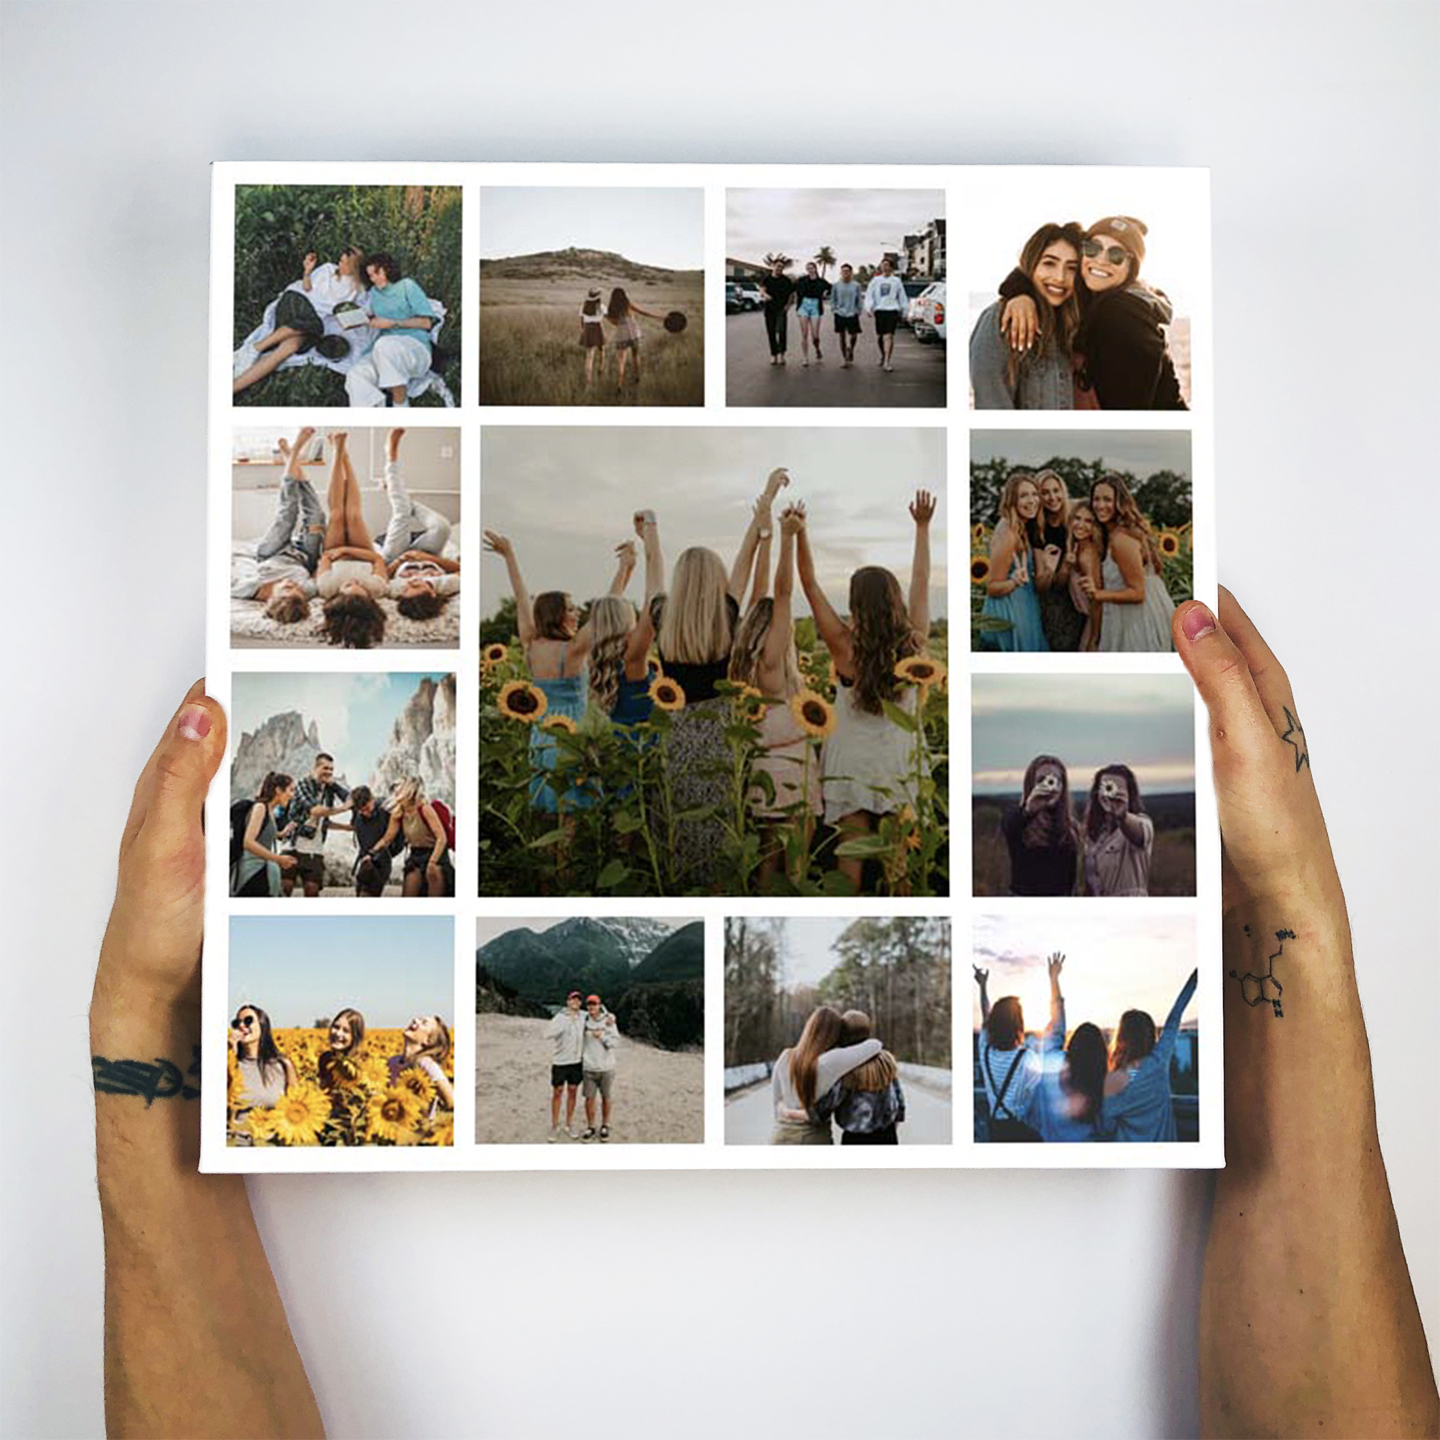 Create your own personalised birthday gift with our custom collage prints so that your loved one can always remember the special moments you both shared in one place with free next day delivery UK. Choose from a huge range of collage templates and display on canvas, poster or frame it!